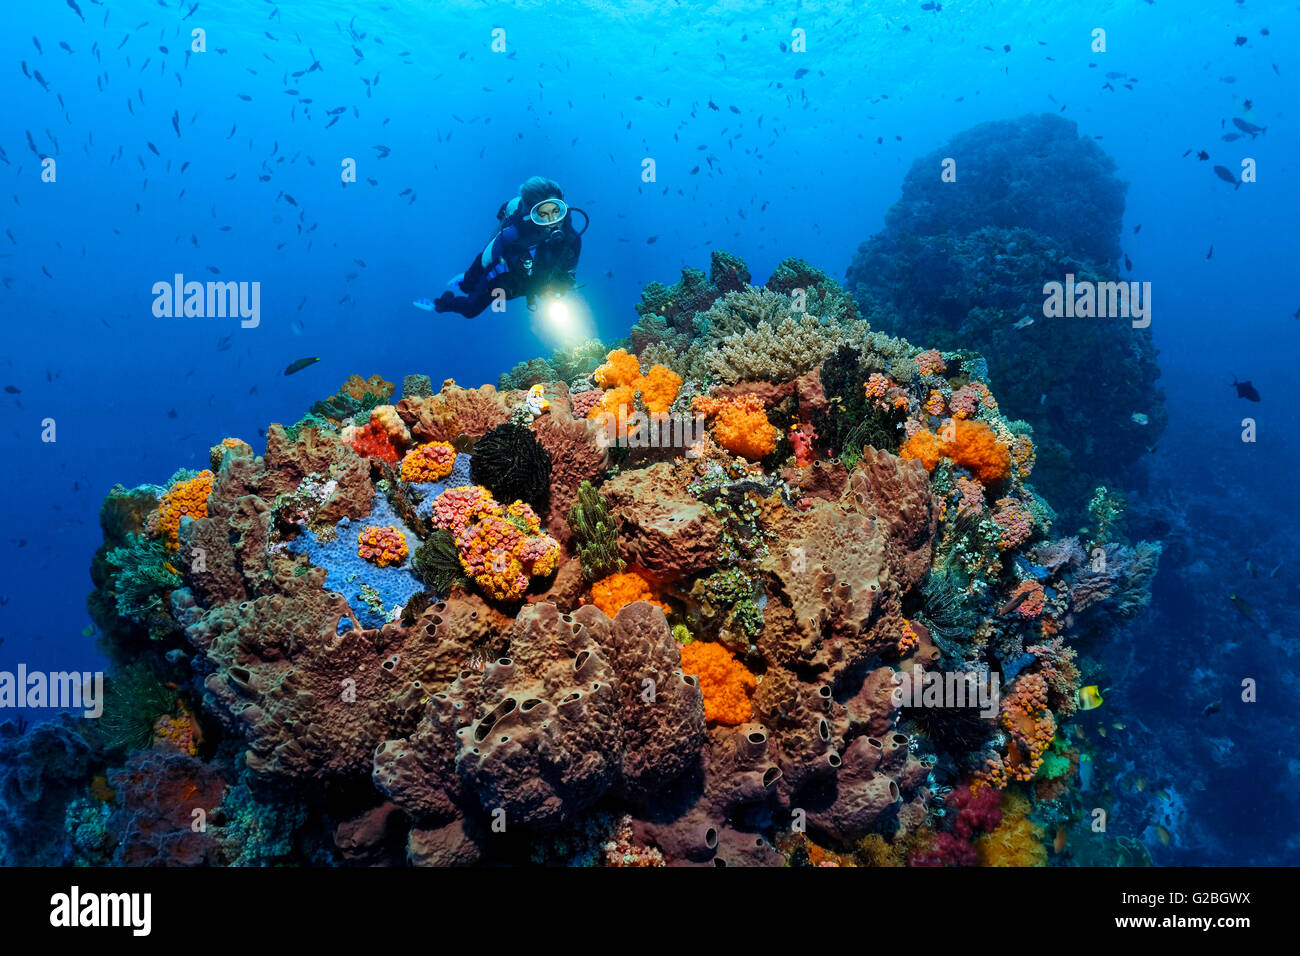 Diver views Coral colony, fish, feather star, soft coral, sponge, Great Barrier Reef, Queensland, Cairns, Pacific Ocean Stock Photo